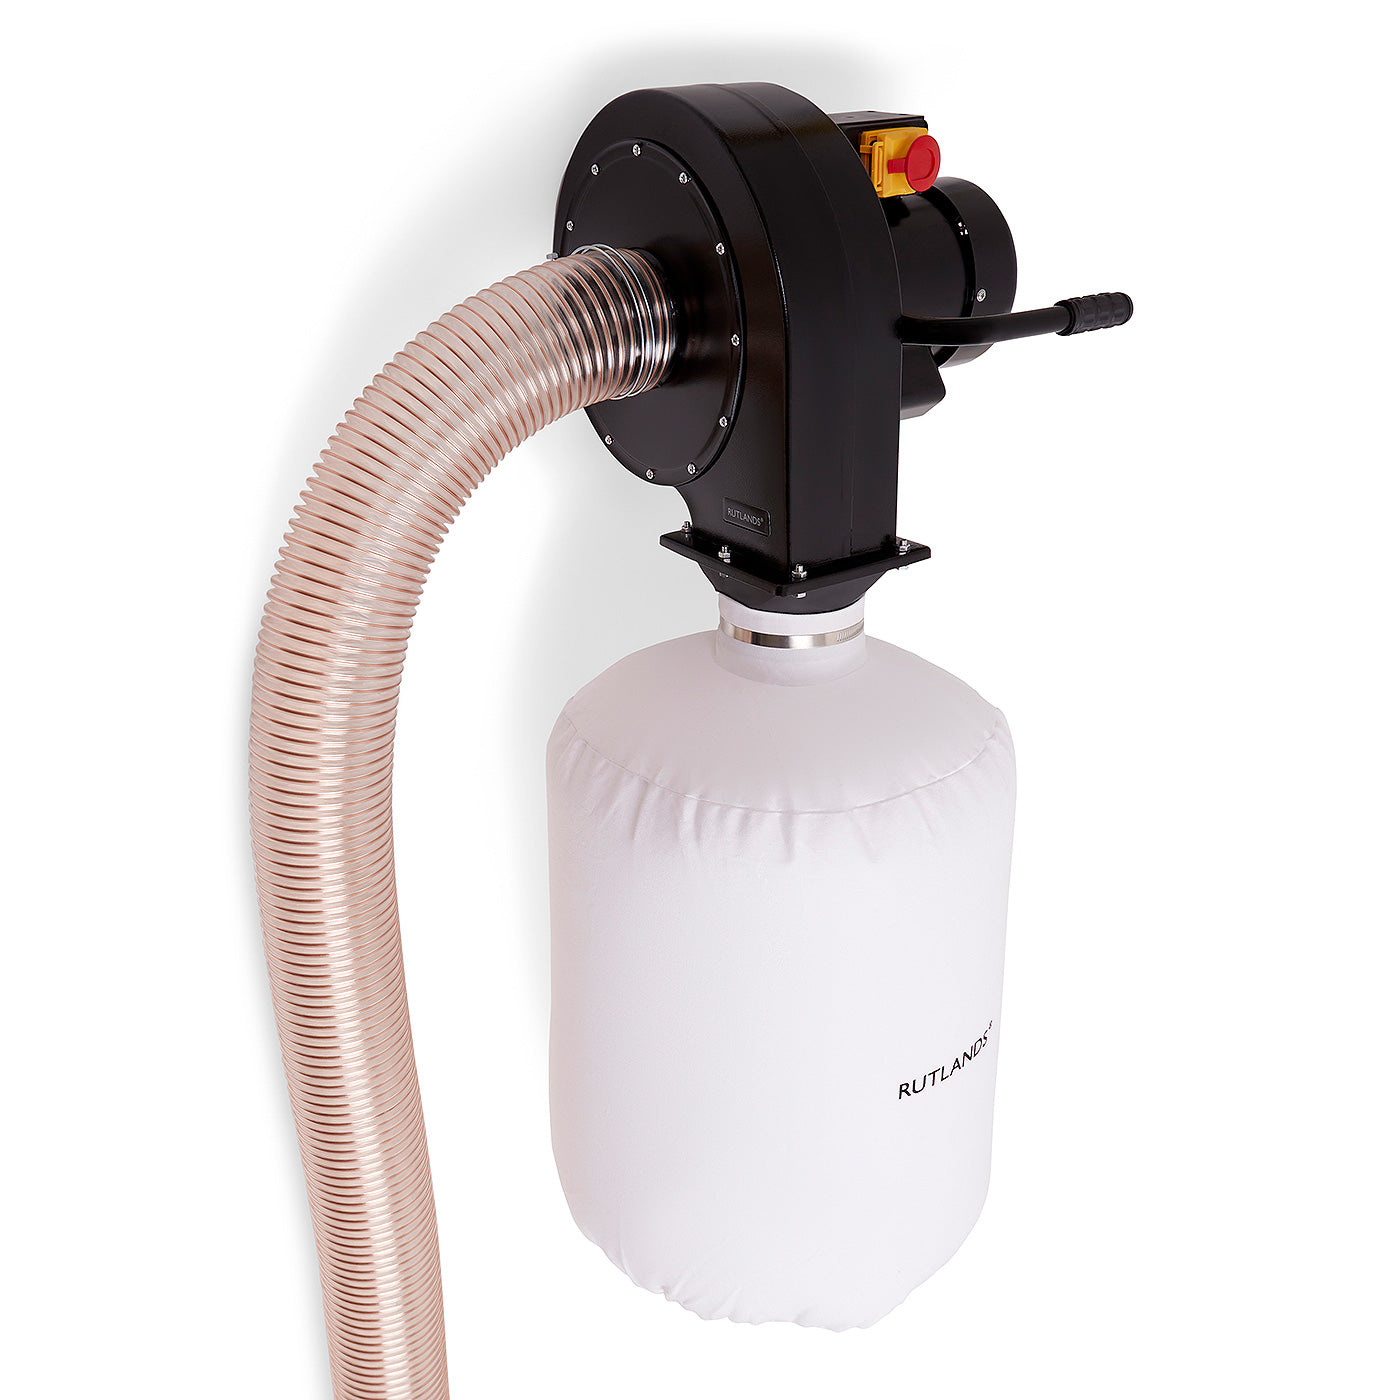 Wall-Mount Dust Collector with 3m Hose